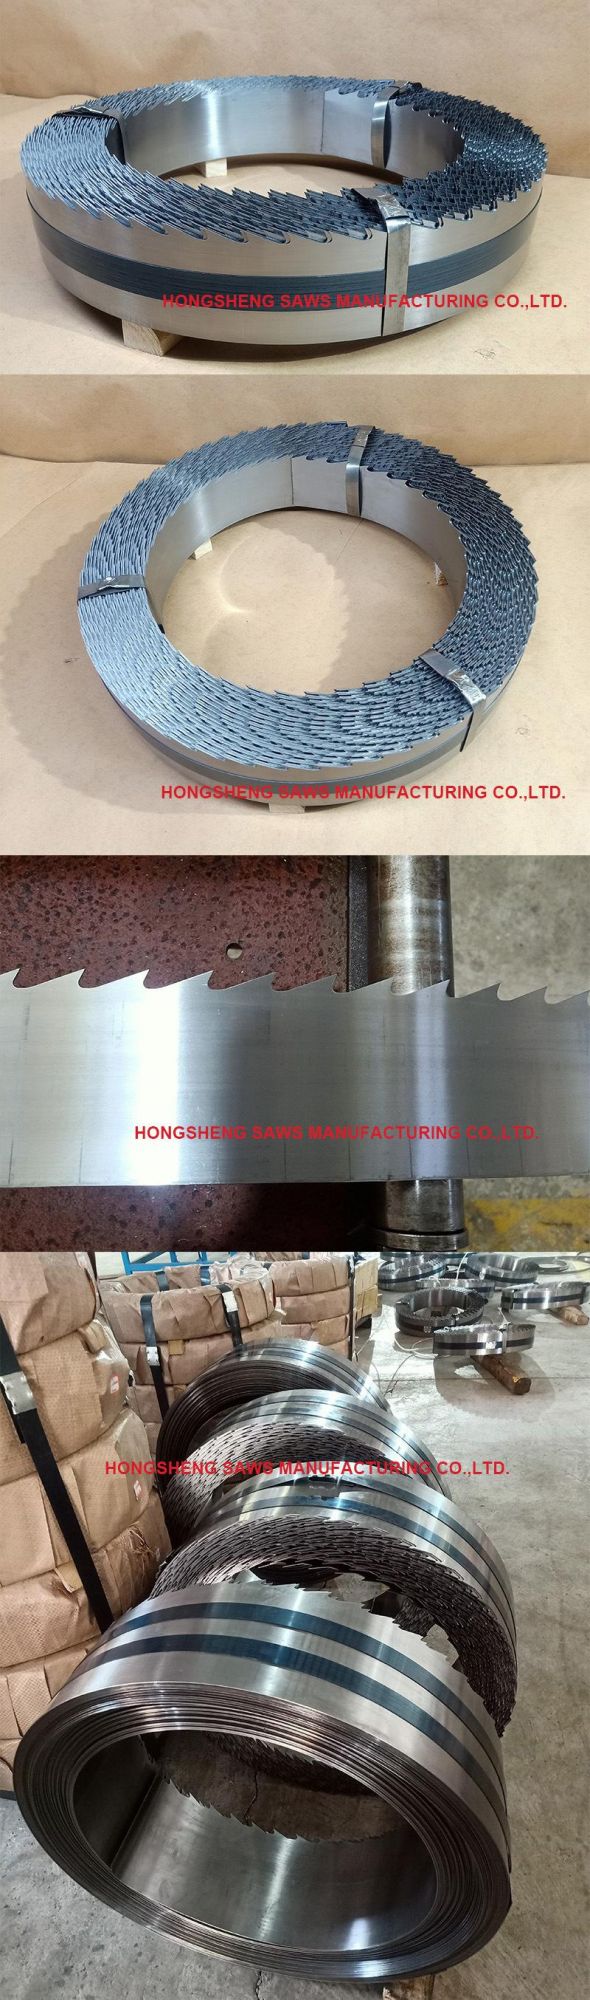 Hot Sales Woodmizer Sawmill Band Saw Blade for Cutting Wood